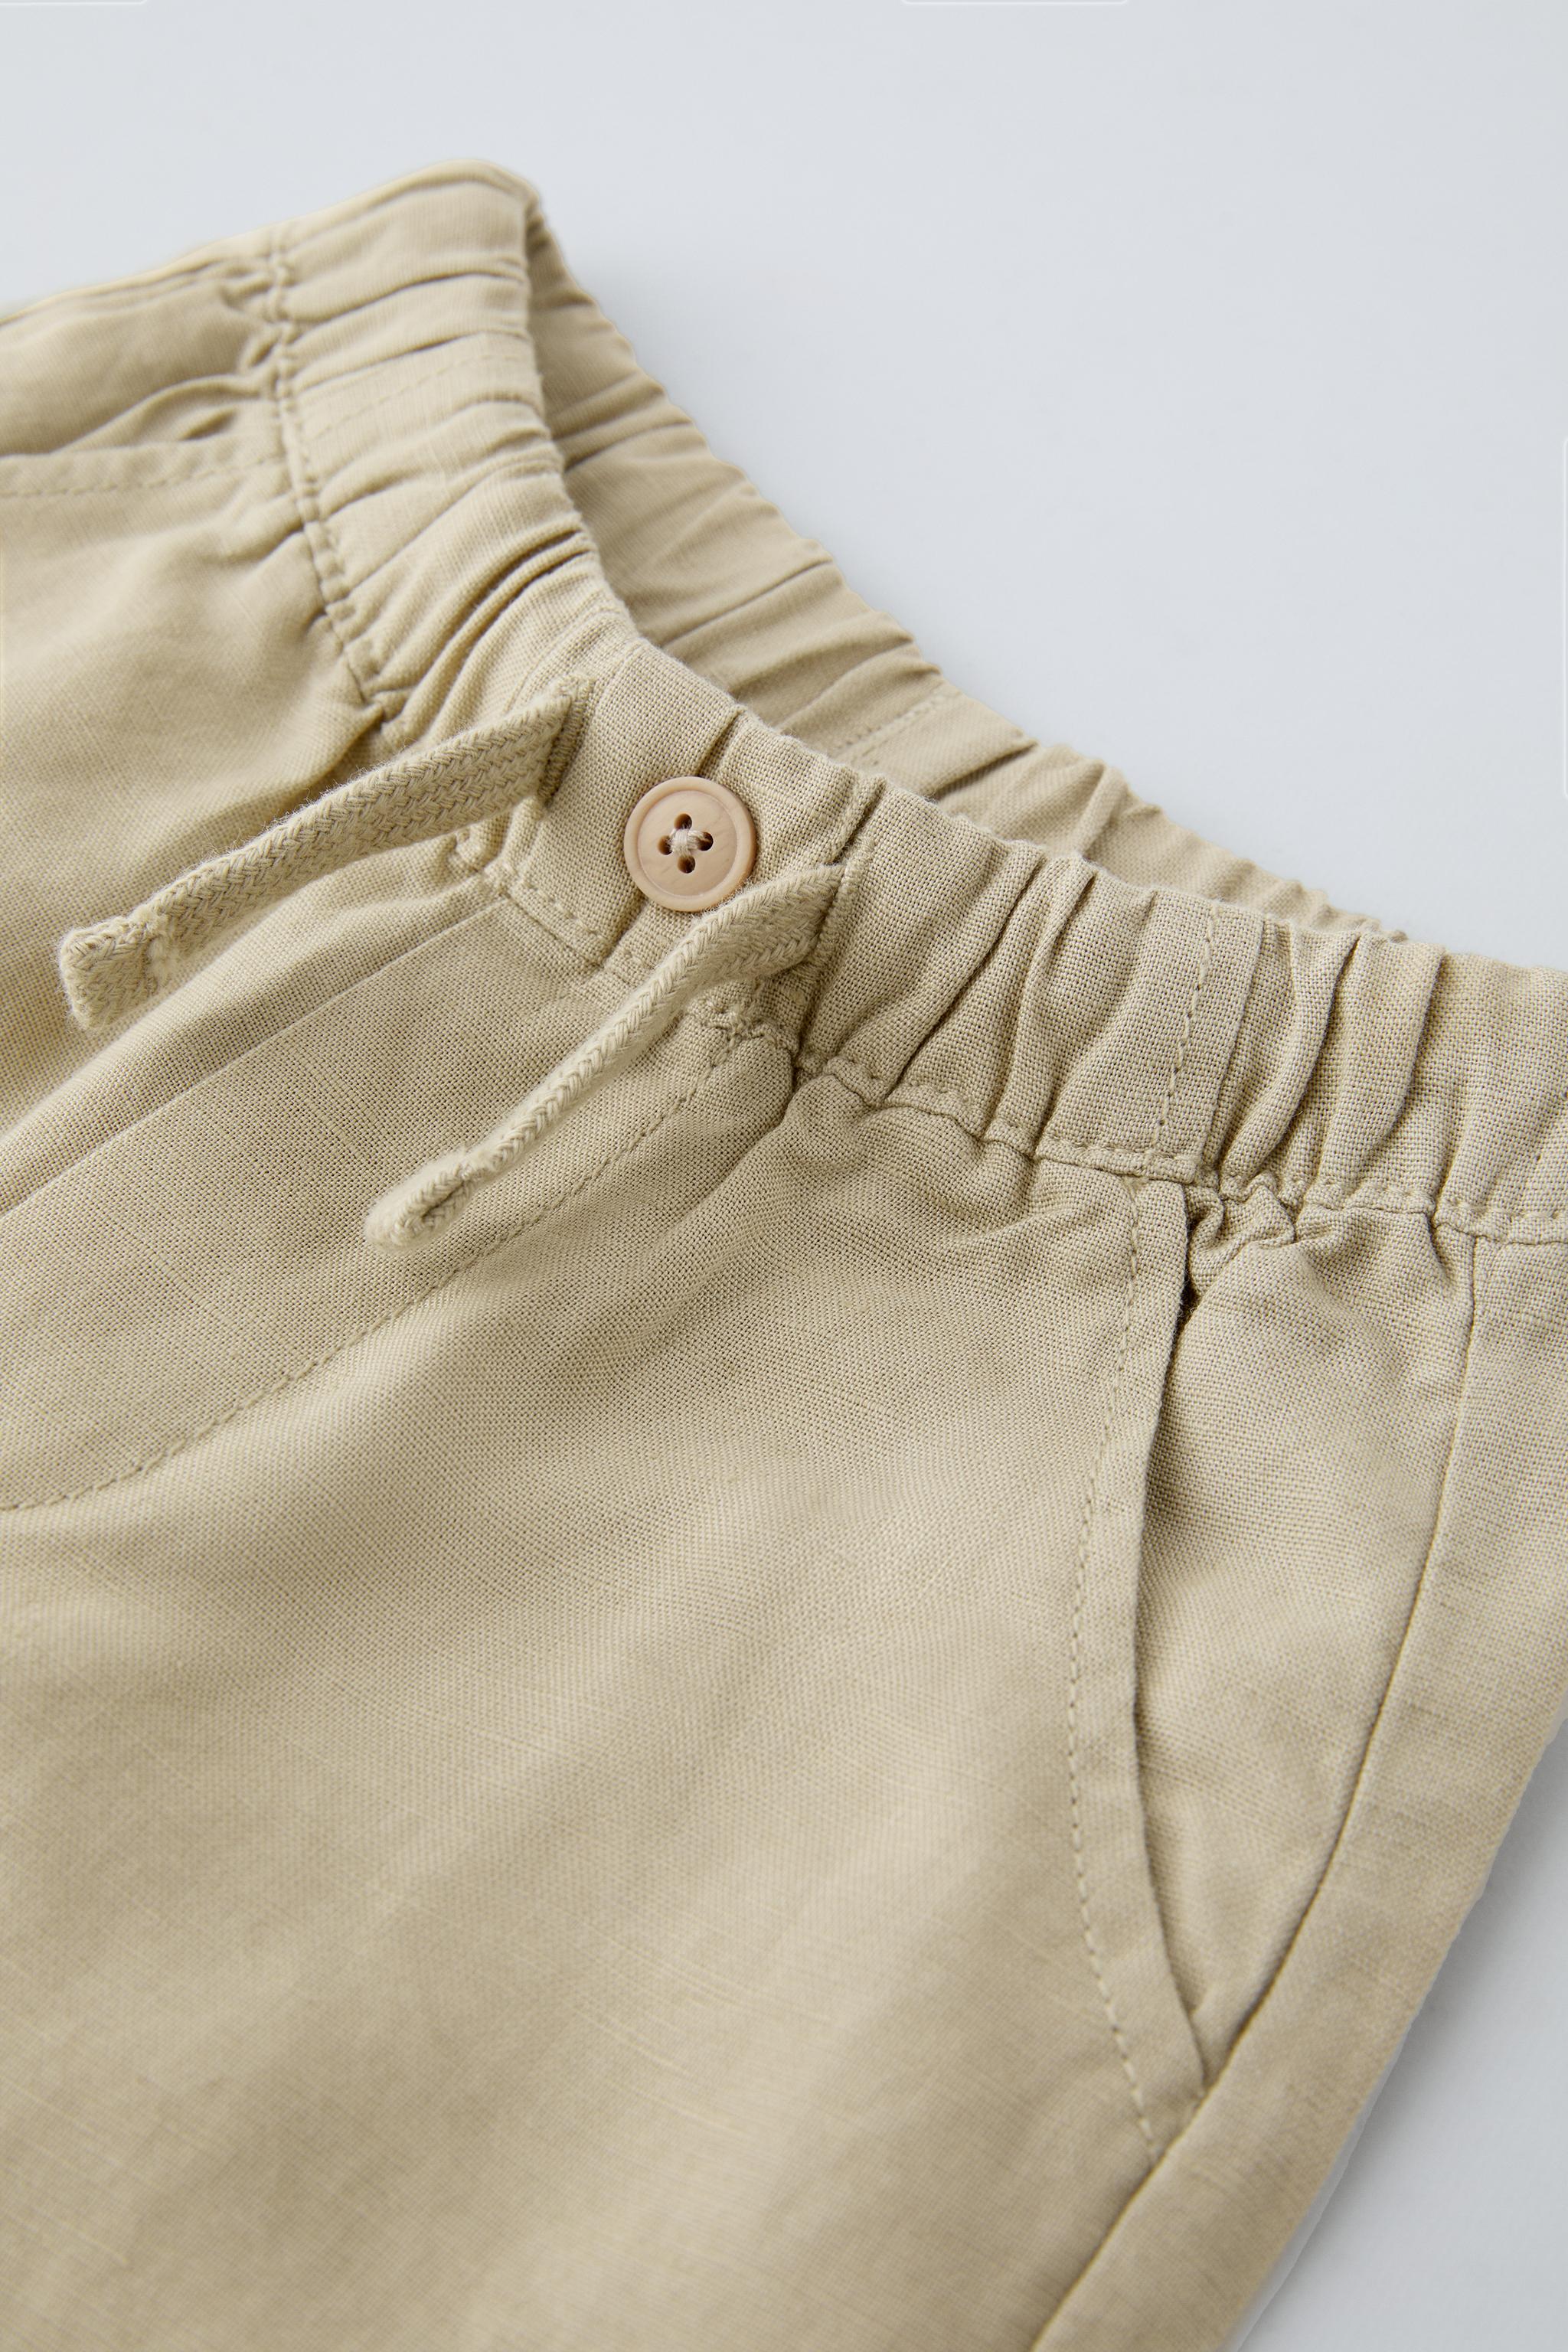 Zara beige linen blend culotte embroidered pants Womens size small